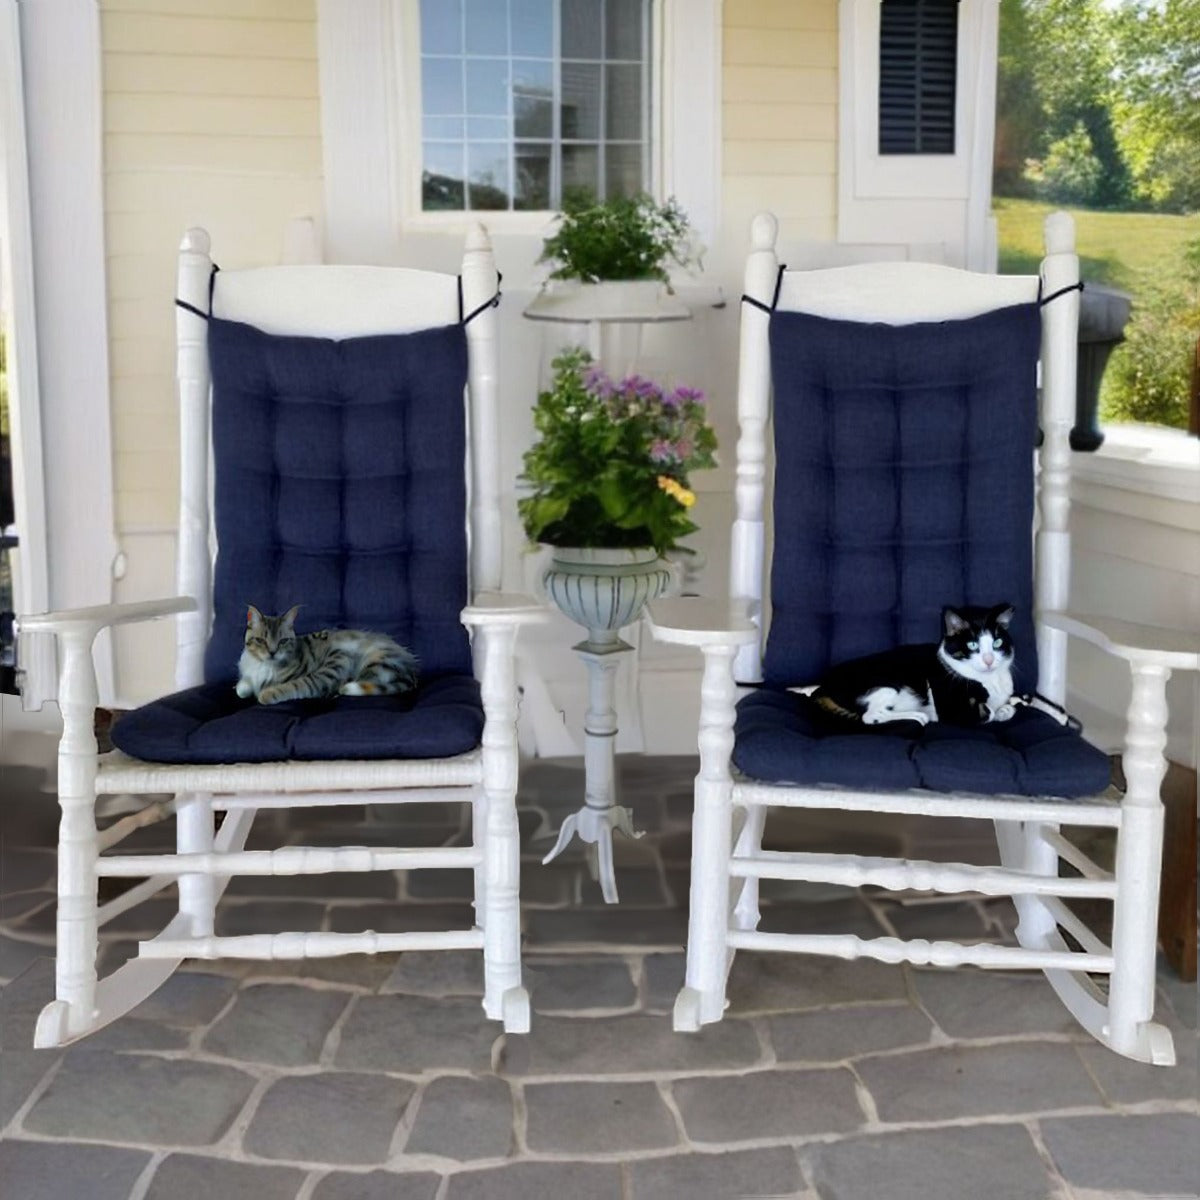 Rave Indigo Blue Indoor / Outdoor Dining Chair Cushions & Patio Chair Cushions Small - APX 15 x 17 / Blue